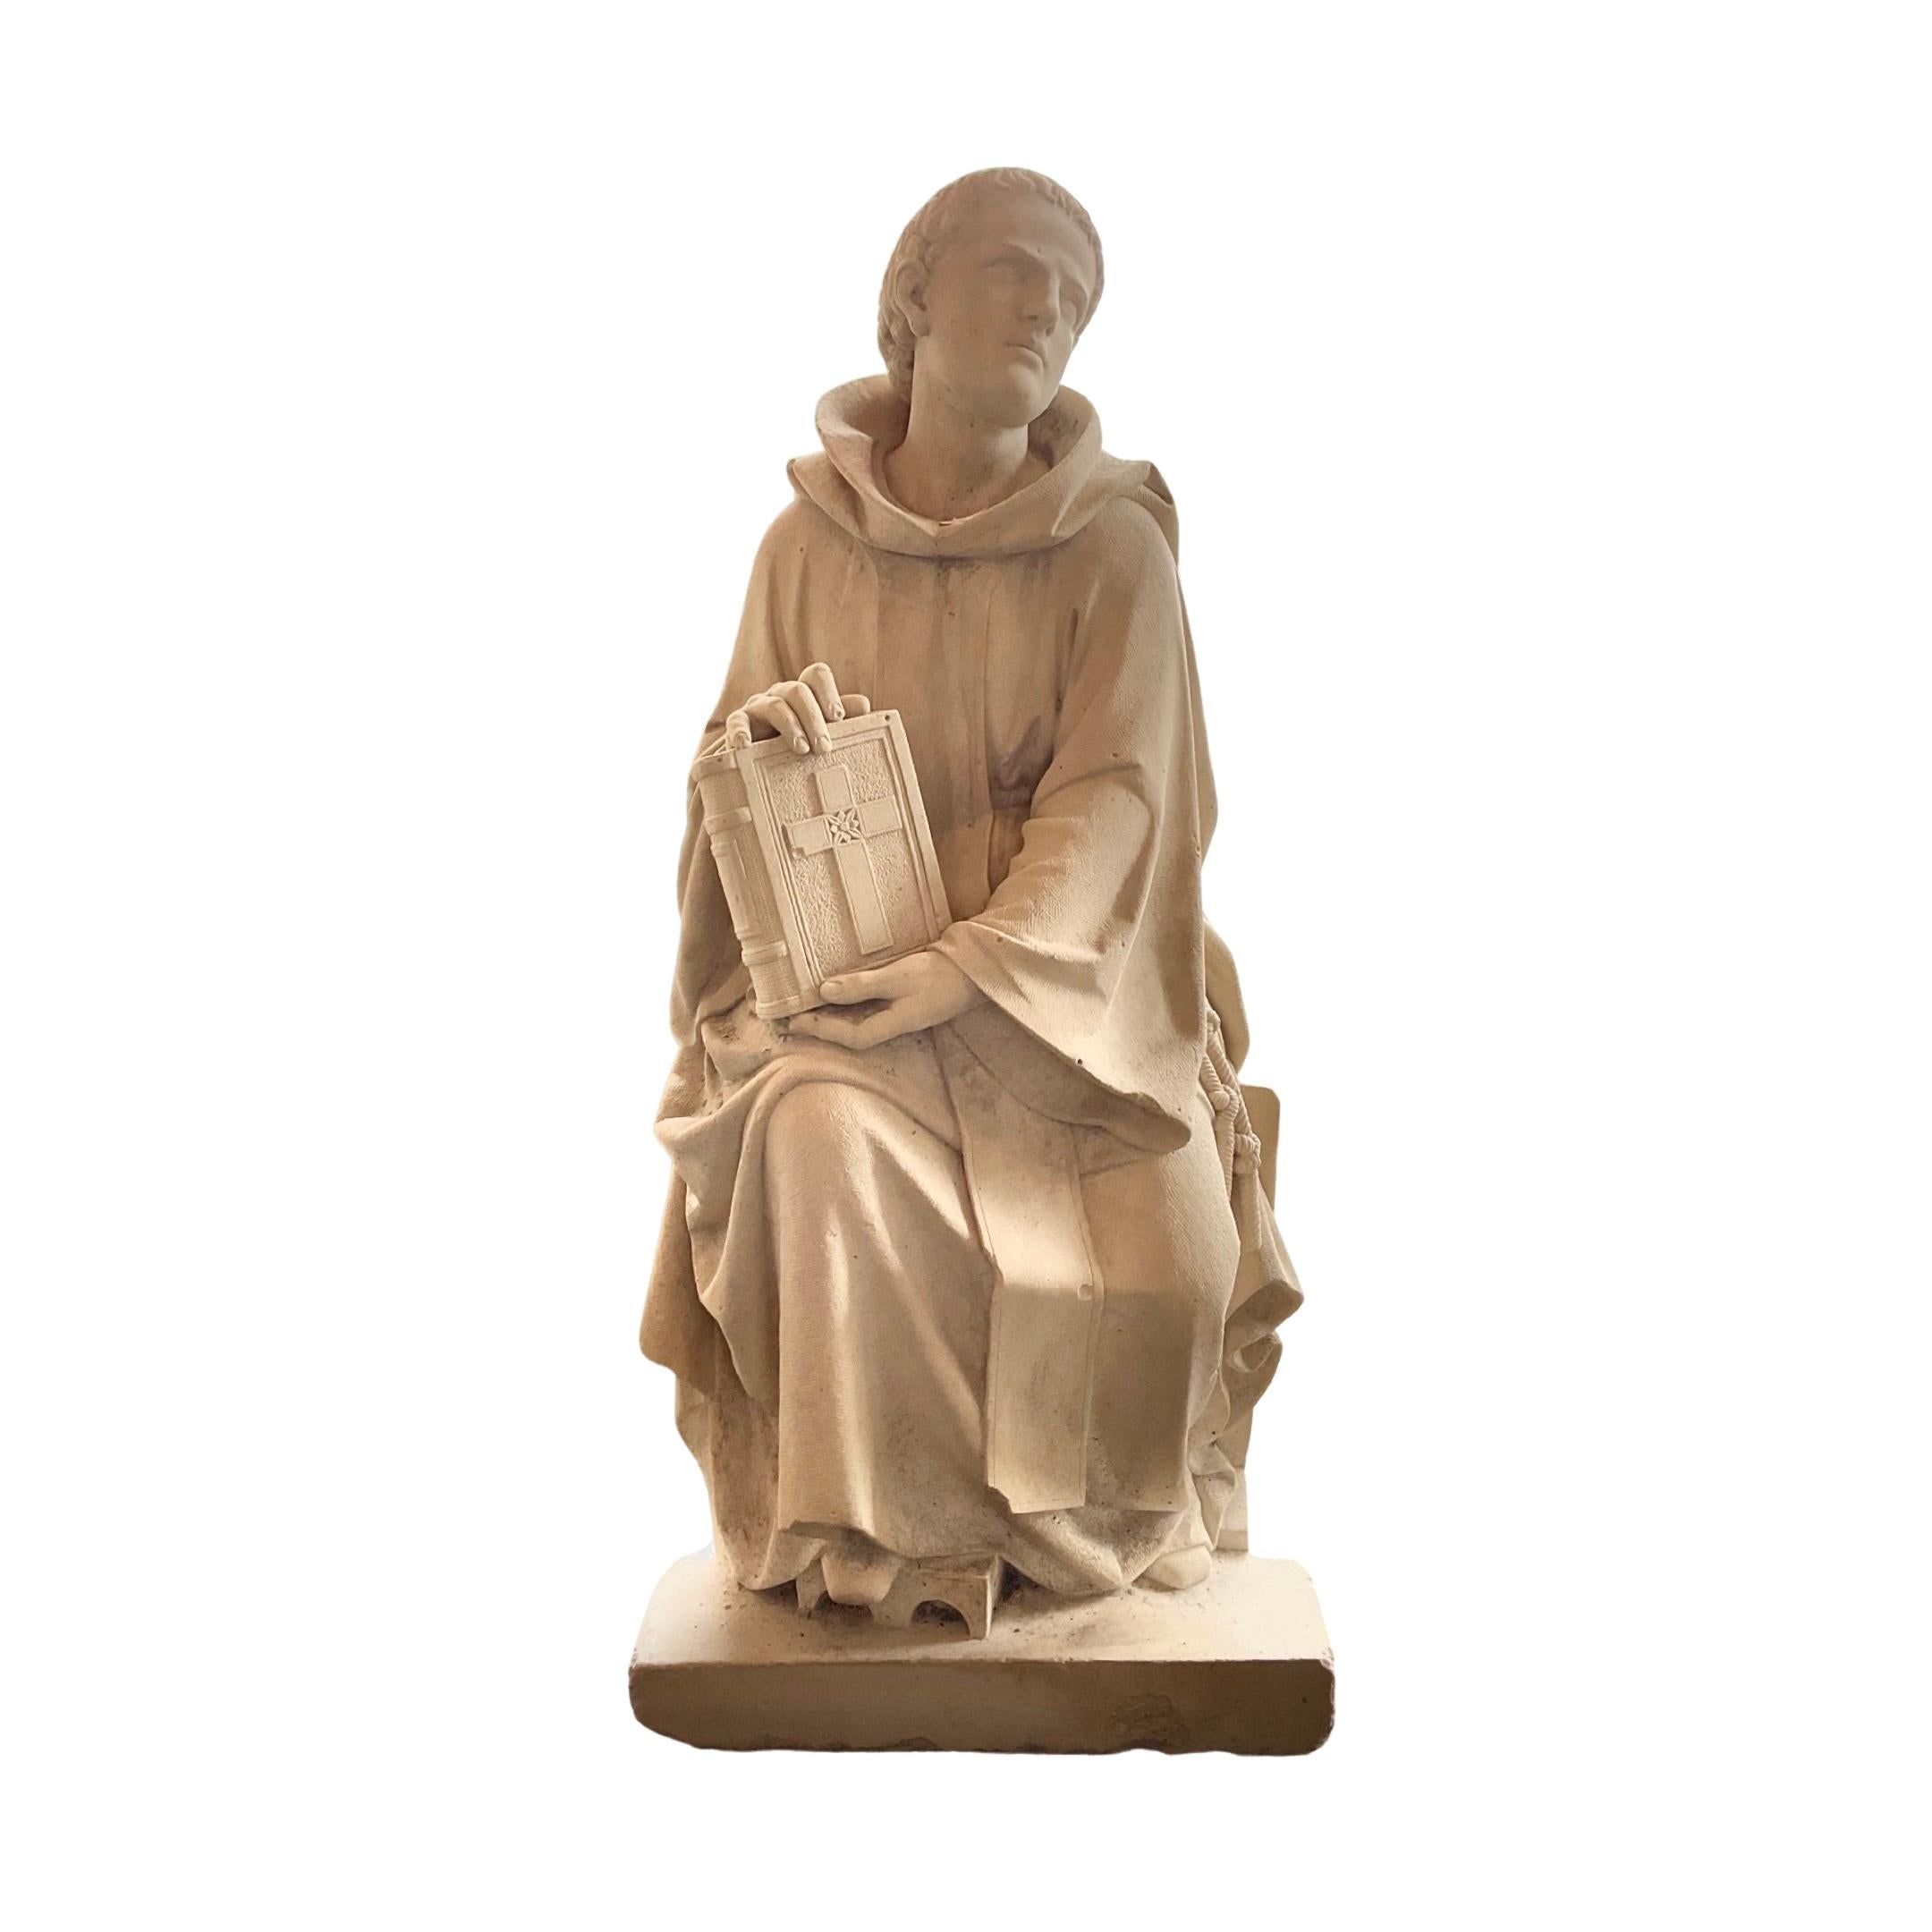 This French Limestone Saint Sculpture is a remarkable 17th century example of skilled artistry, enduringly fashioned from French Limestone to preserve its aesthetic legacy.